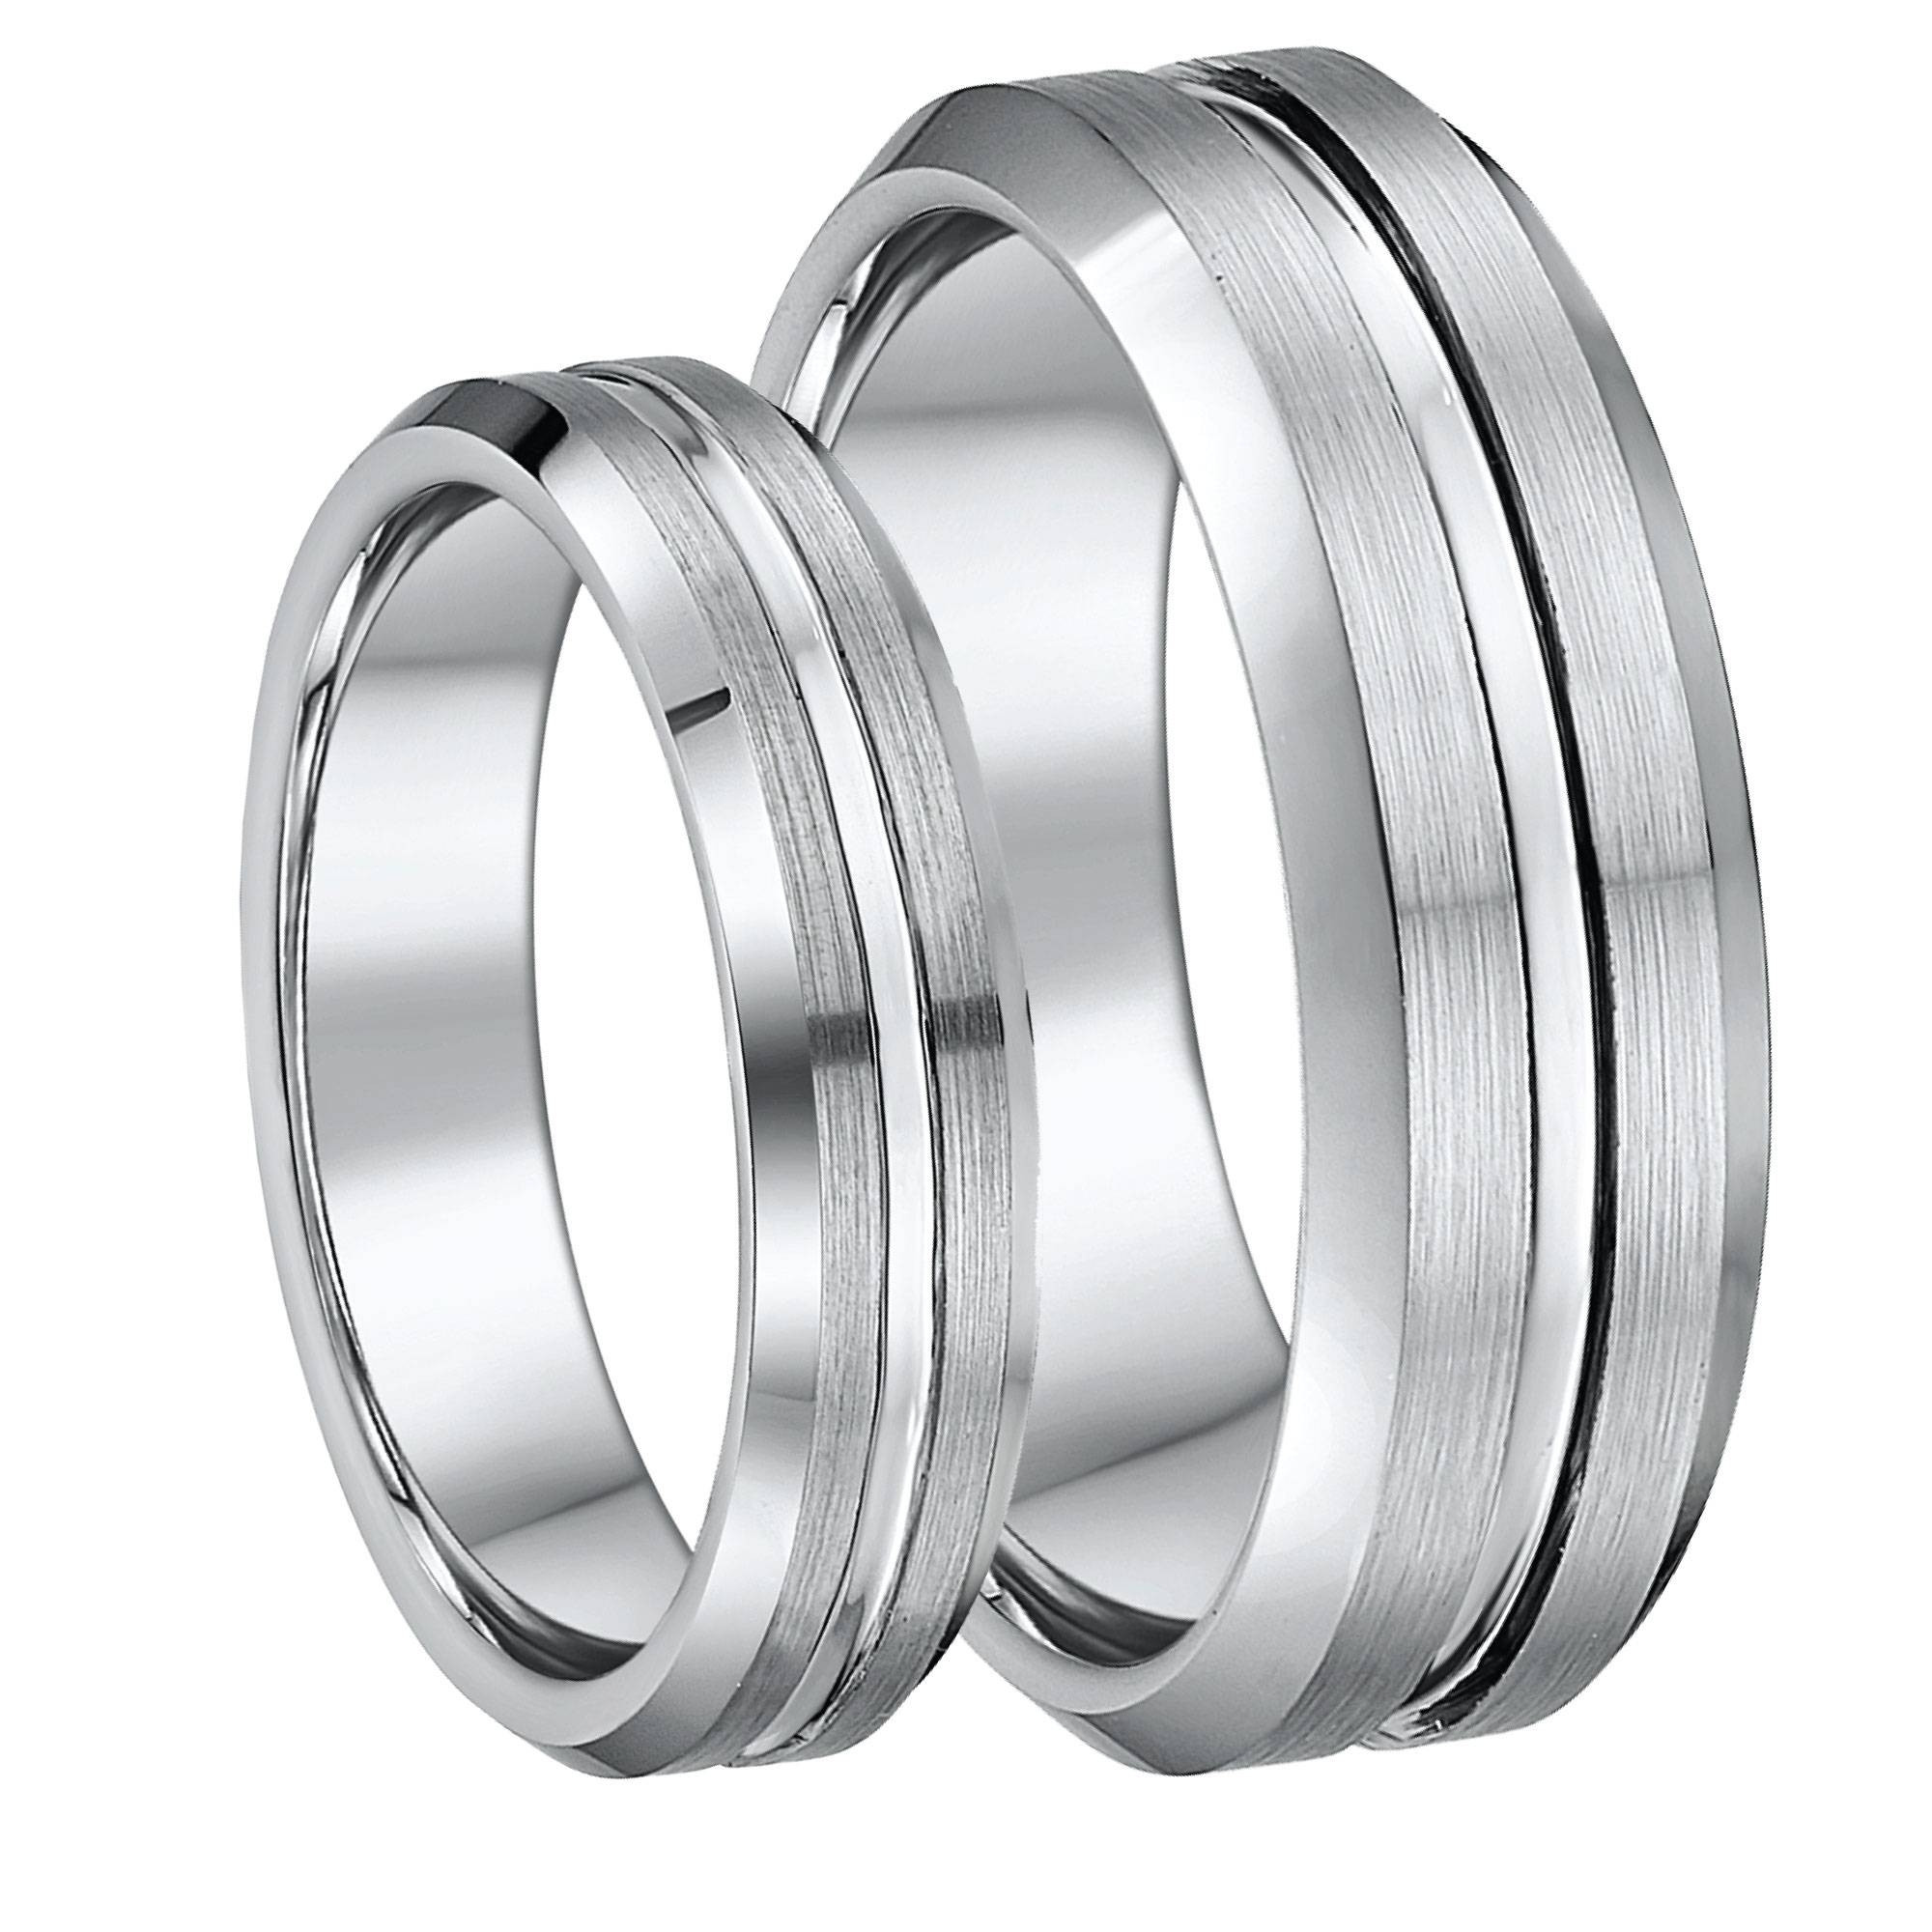 Tungsten Wedding Band Sets His And Hers Unique 2019 Latest Tungsten Wedding Bands Sets His And Hers Of Tungsten Wedding Band Sets His And Hers 2 